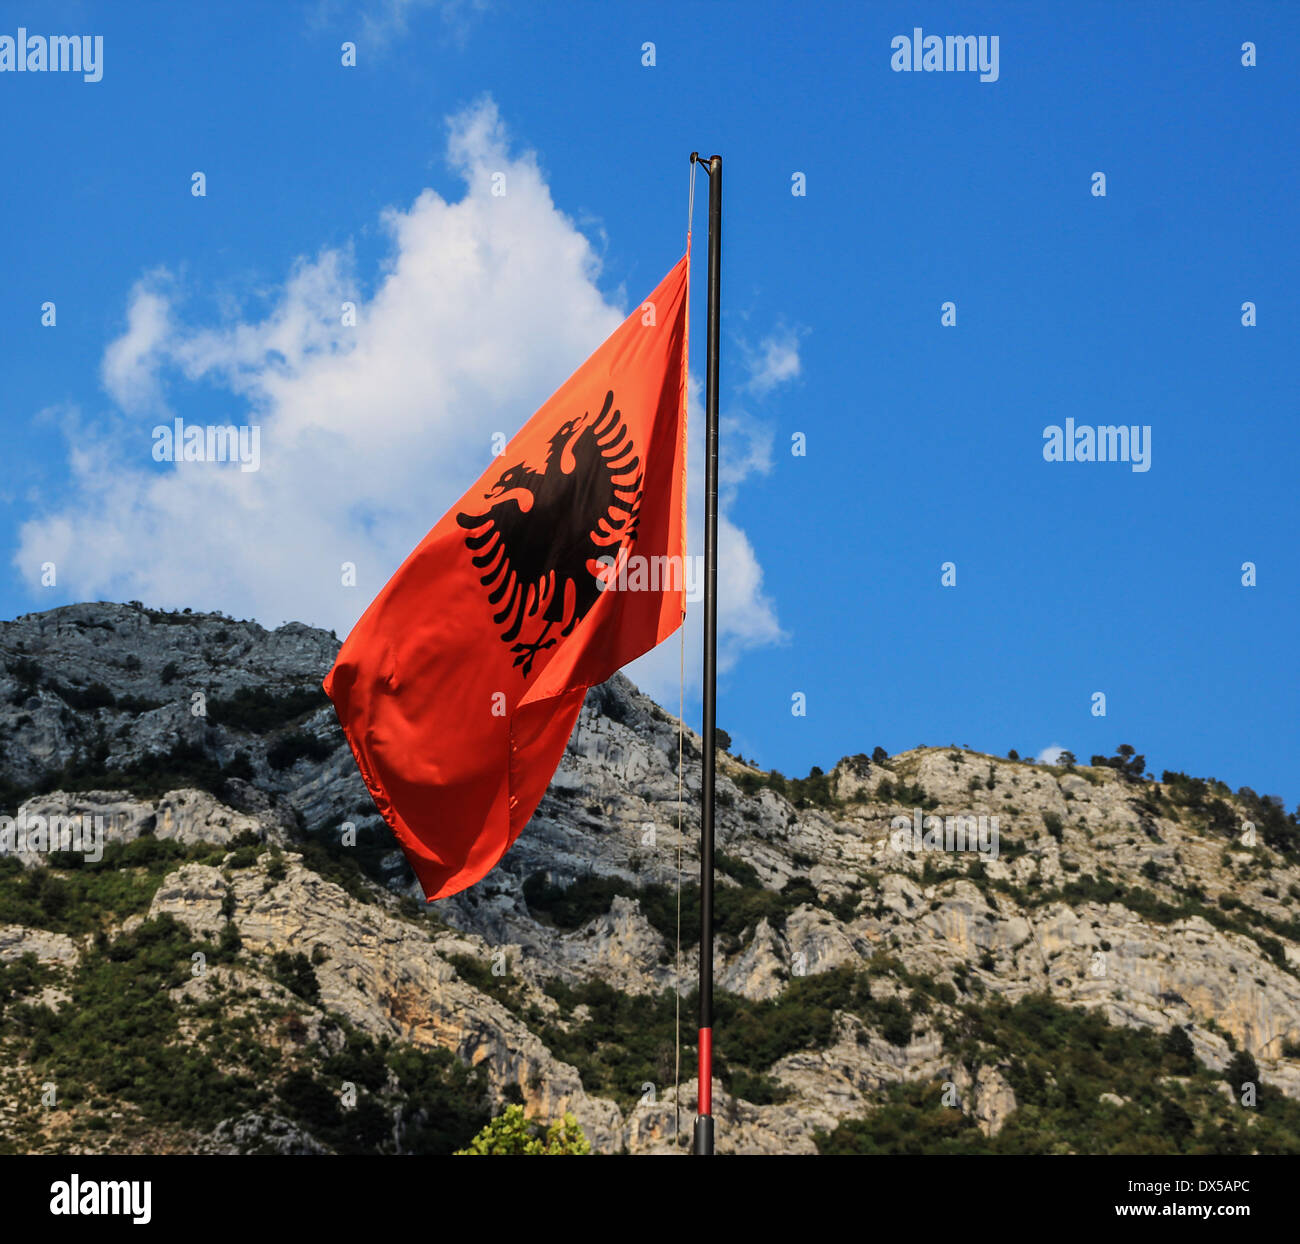 Albanian flag with black eagle on red background, with background the mountains around Kruja Castle, the Castle of national hero Skanderbeg Stock Photo